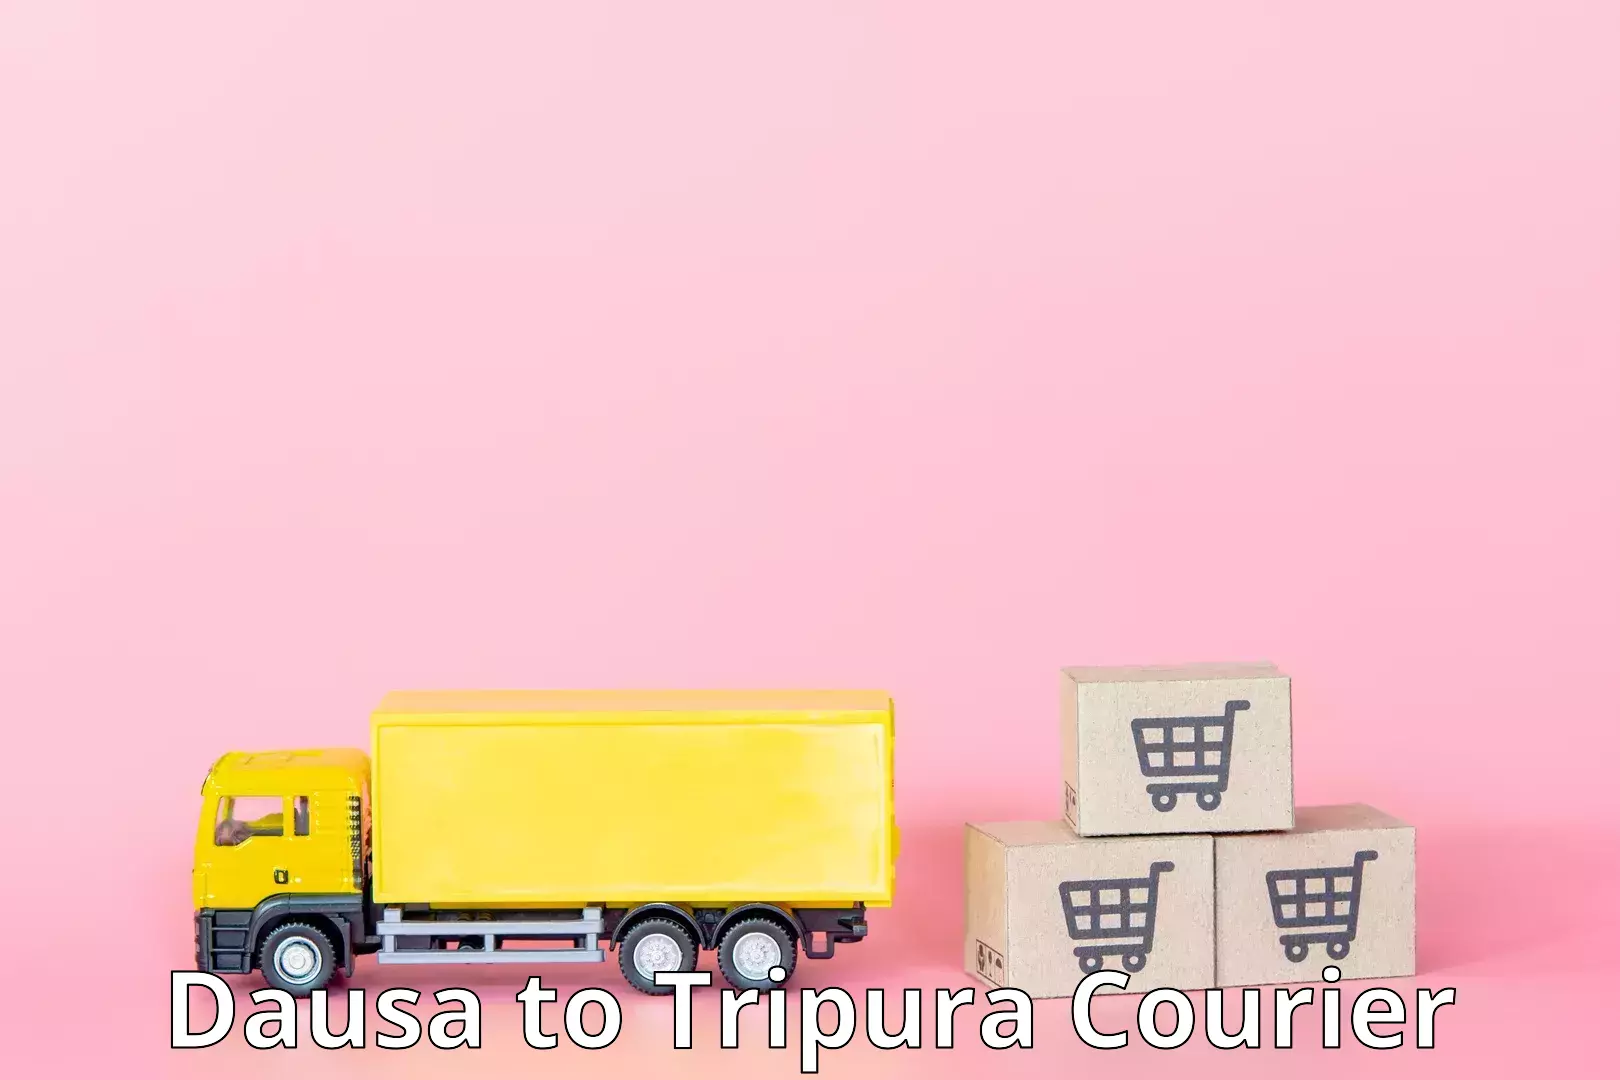 Smart shipping technology in Dausa to Udaipur Tripura